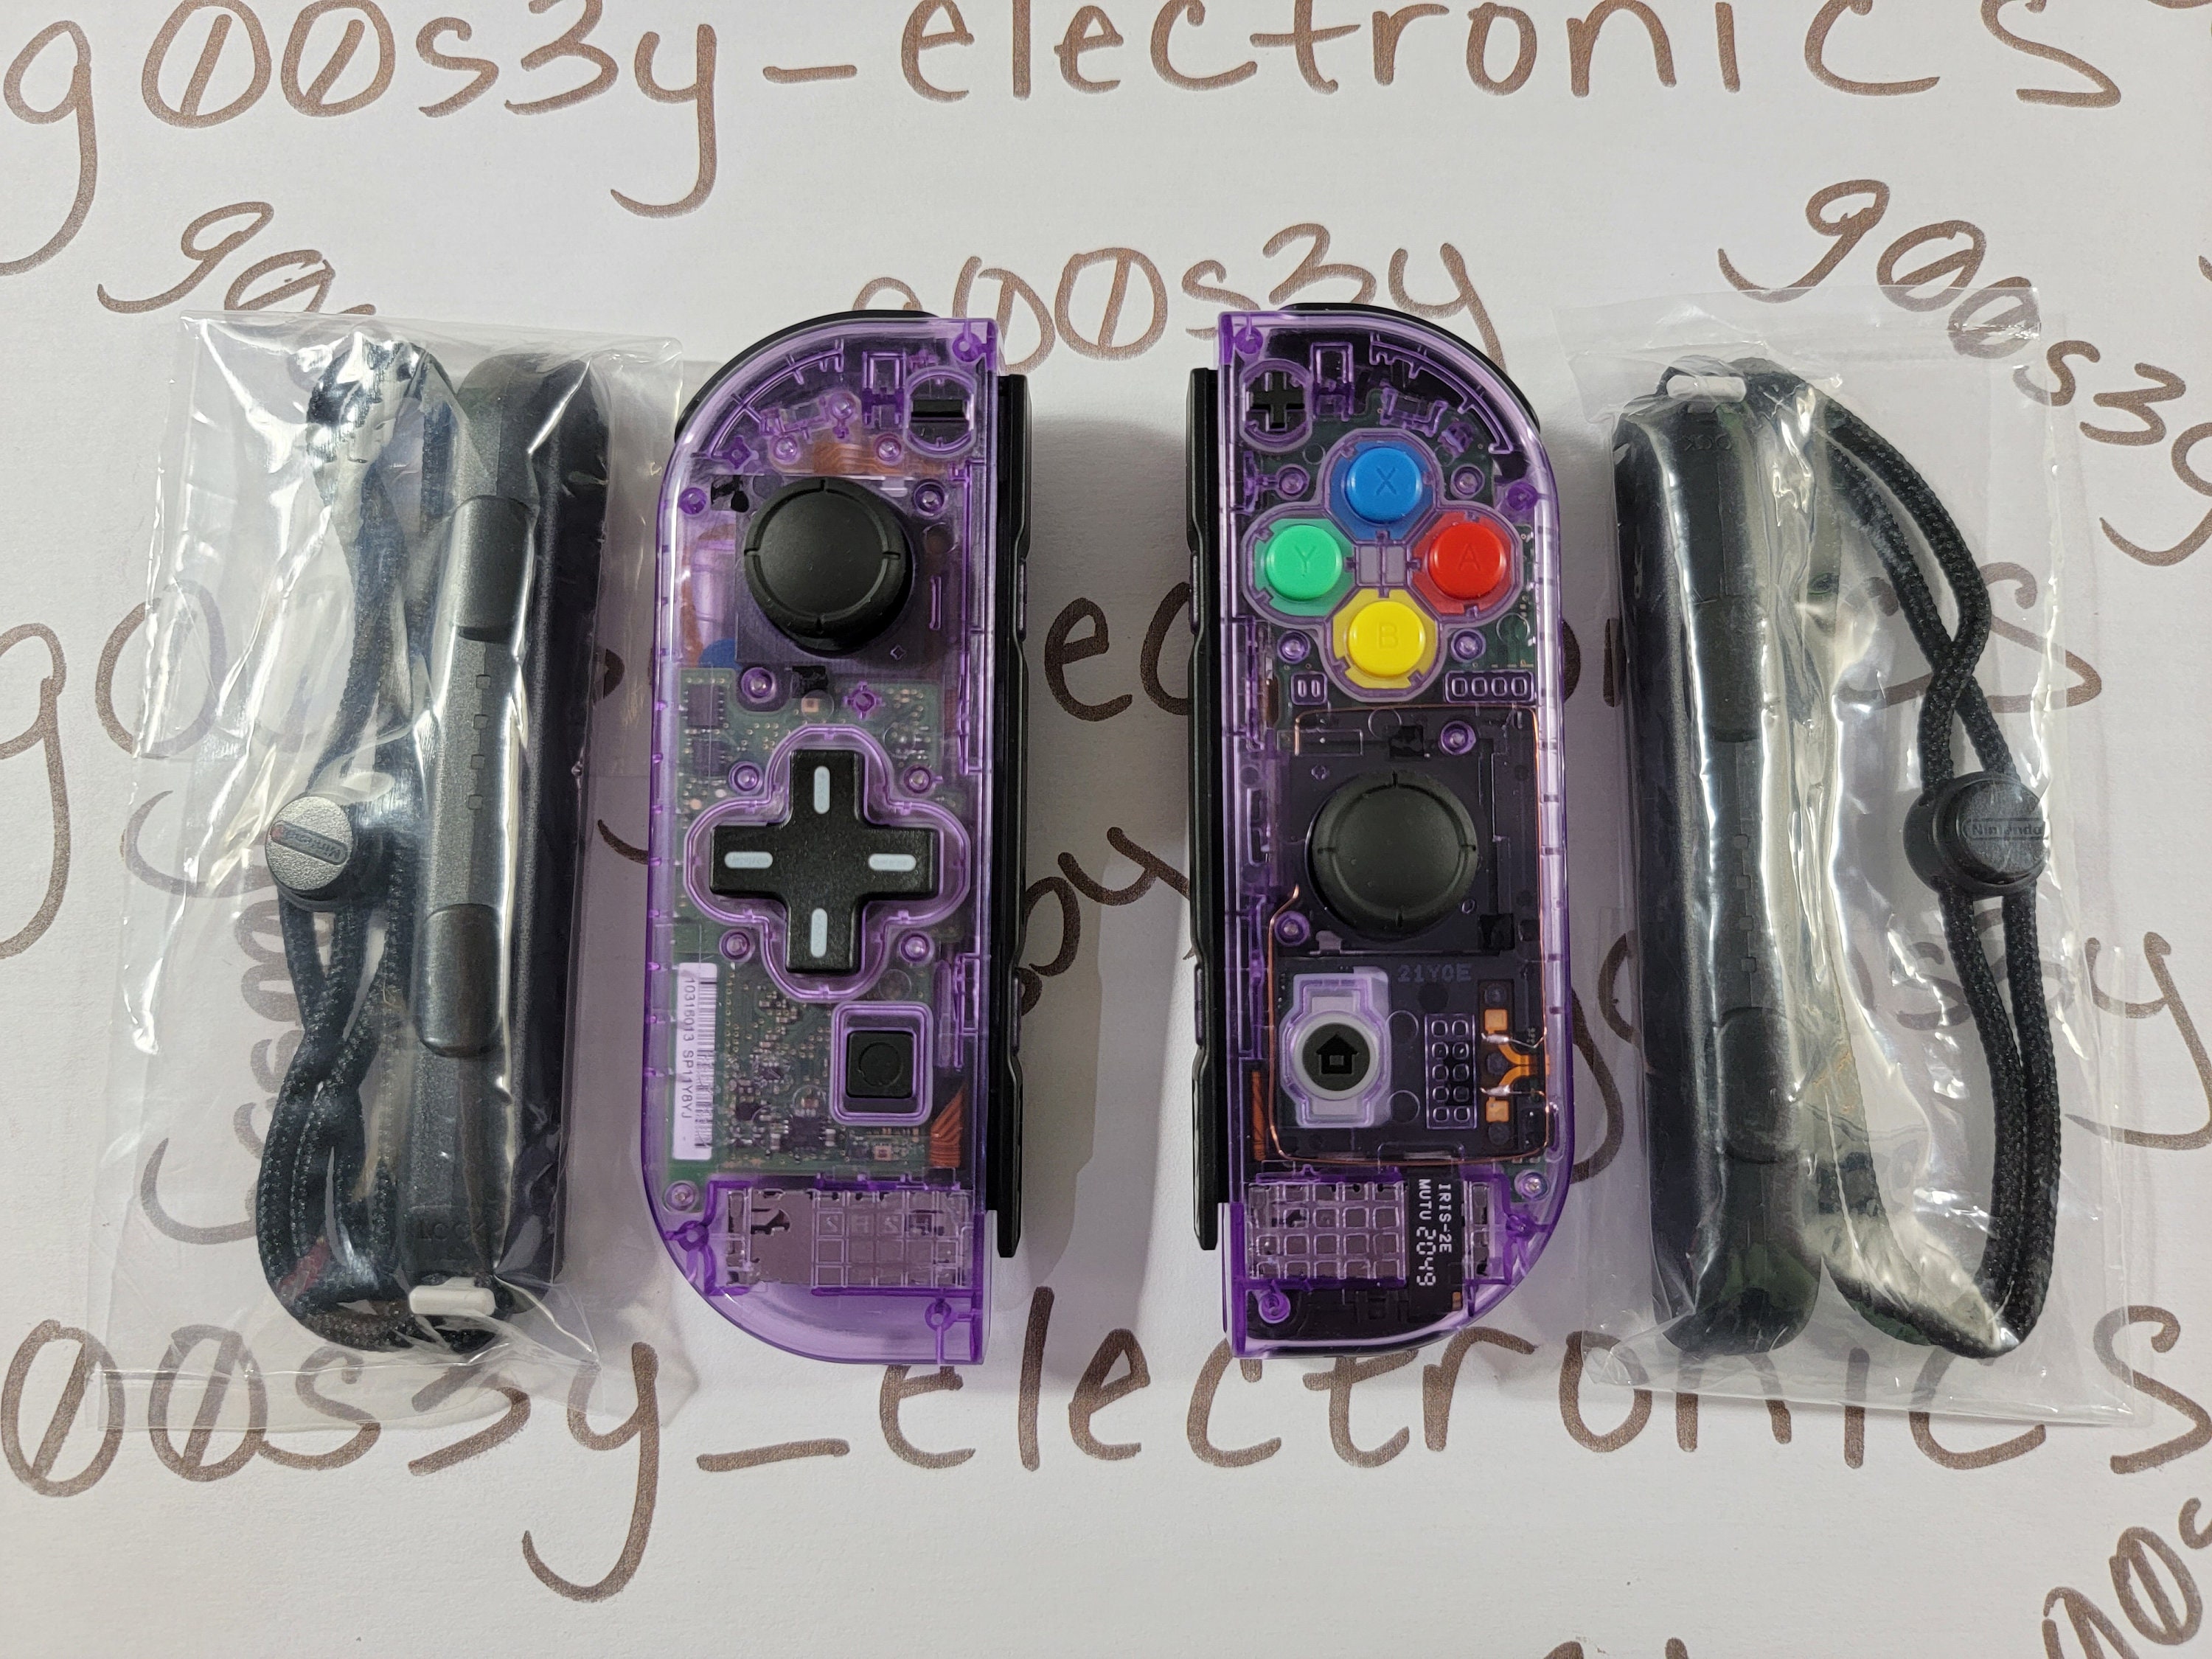 Have A Look At The Gorgeous Atomic Purple Nintendo Switch Joy-Con